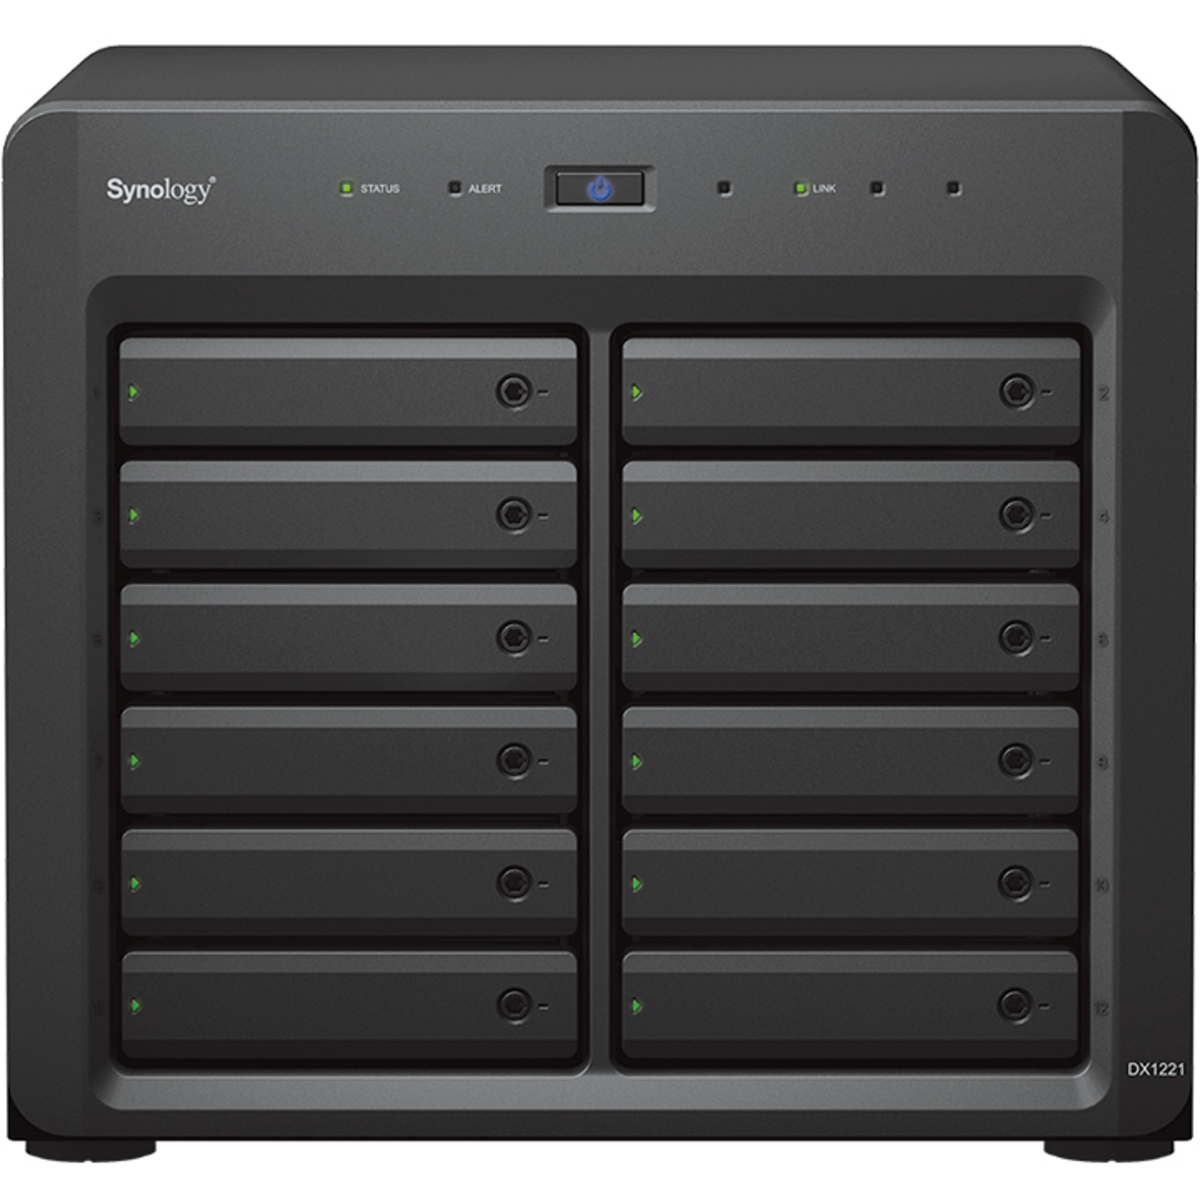 Synology DX1222 External Expansion Drive 264tb 12-Bay Desktop Multimedia / Power User / Business Expansion Enclosure 11x24tb Western Digital Ultrastar HC580 SED WUH722424ALE6L1 3.5 7200rpm SATA 6Gb/s HDD ENTERPRISE Class Drives Installed - Burn-In Tested DX1222 External Expansion Drive